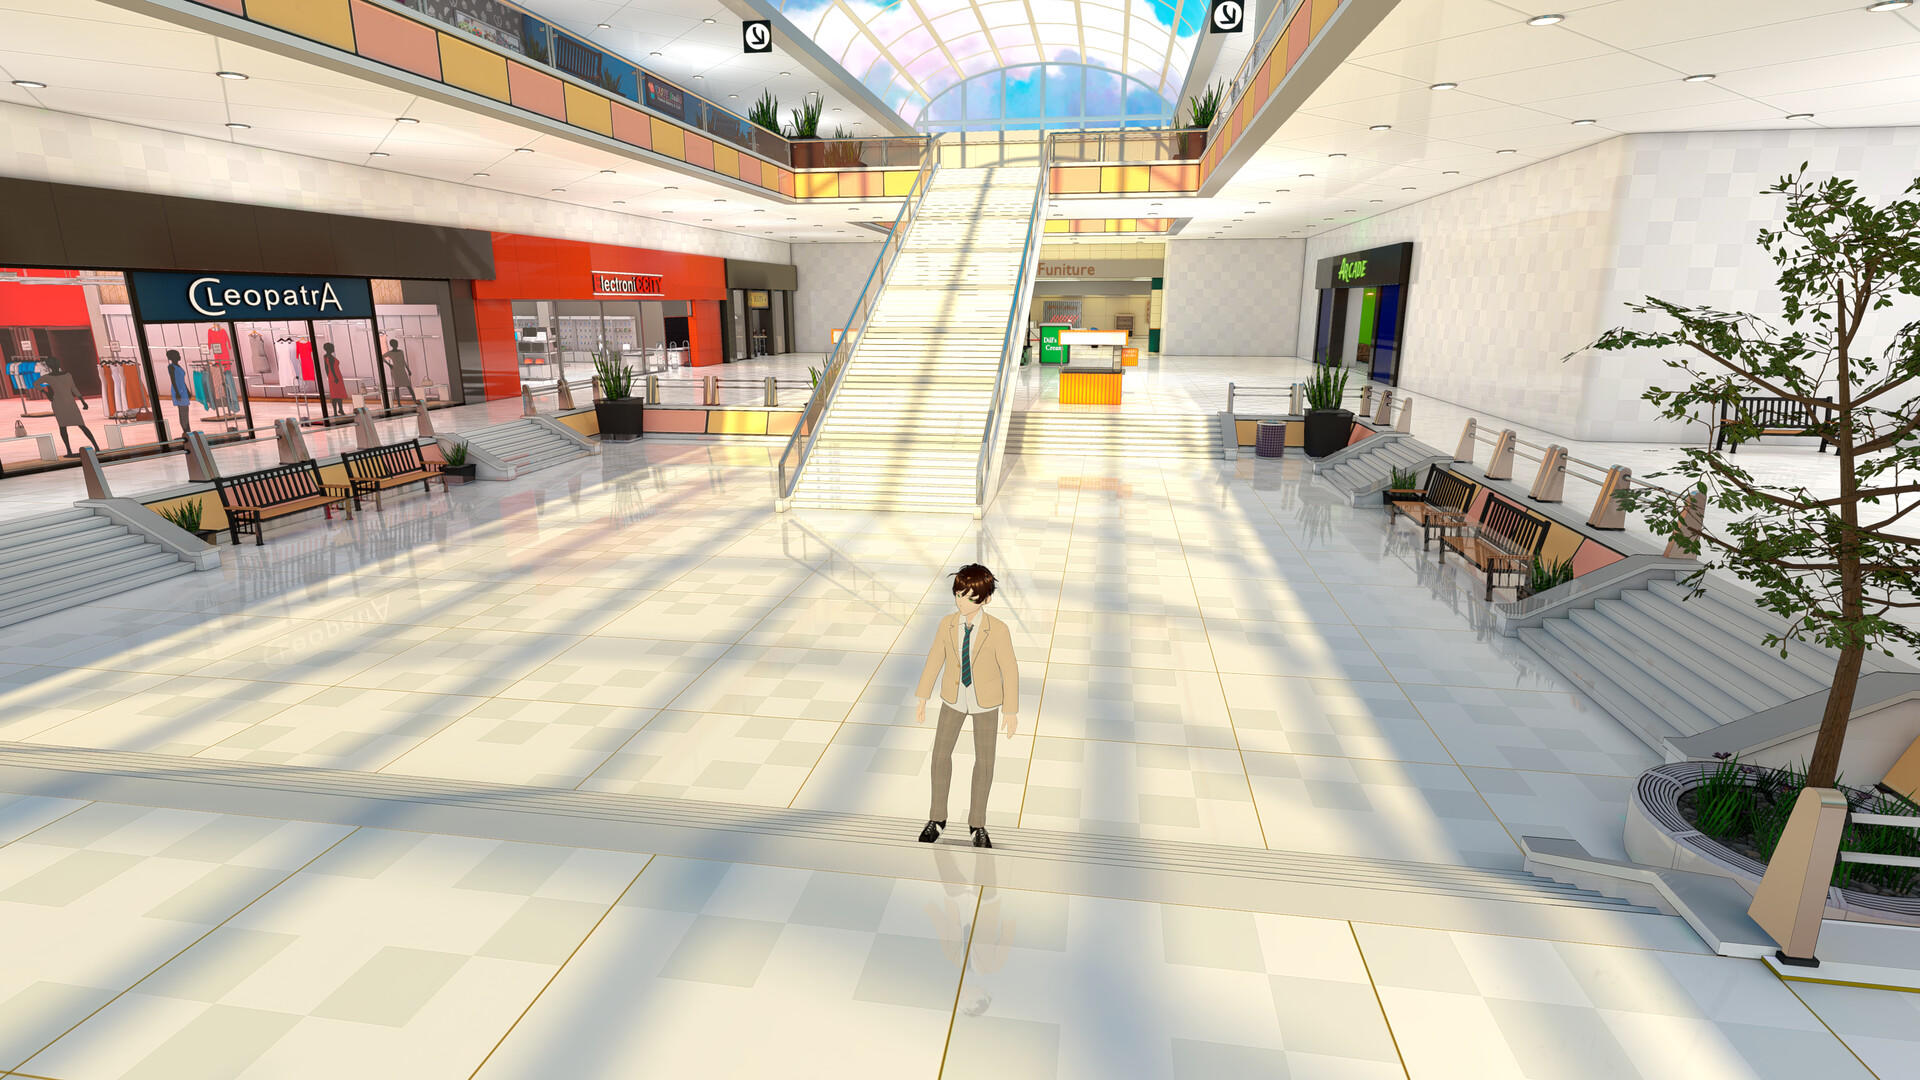 Screenshot of Play minigames with Reiko